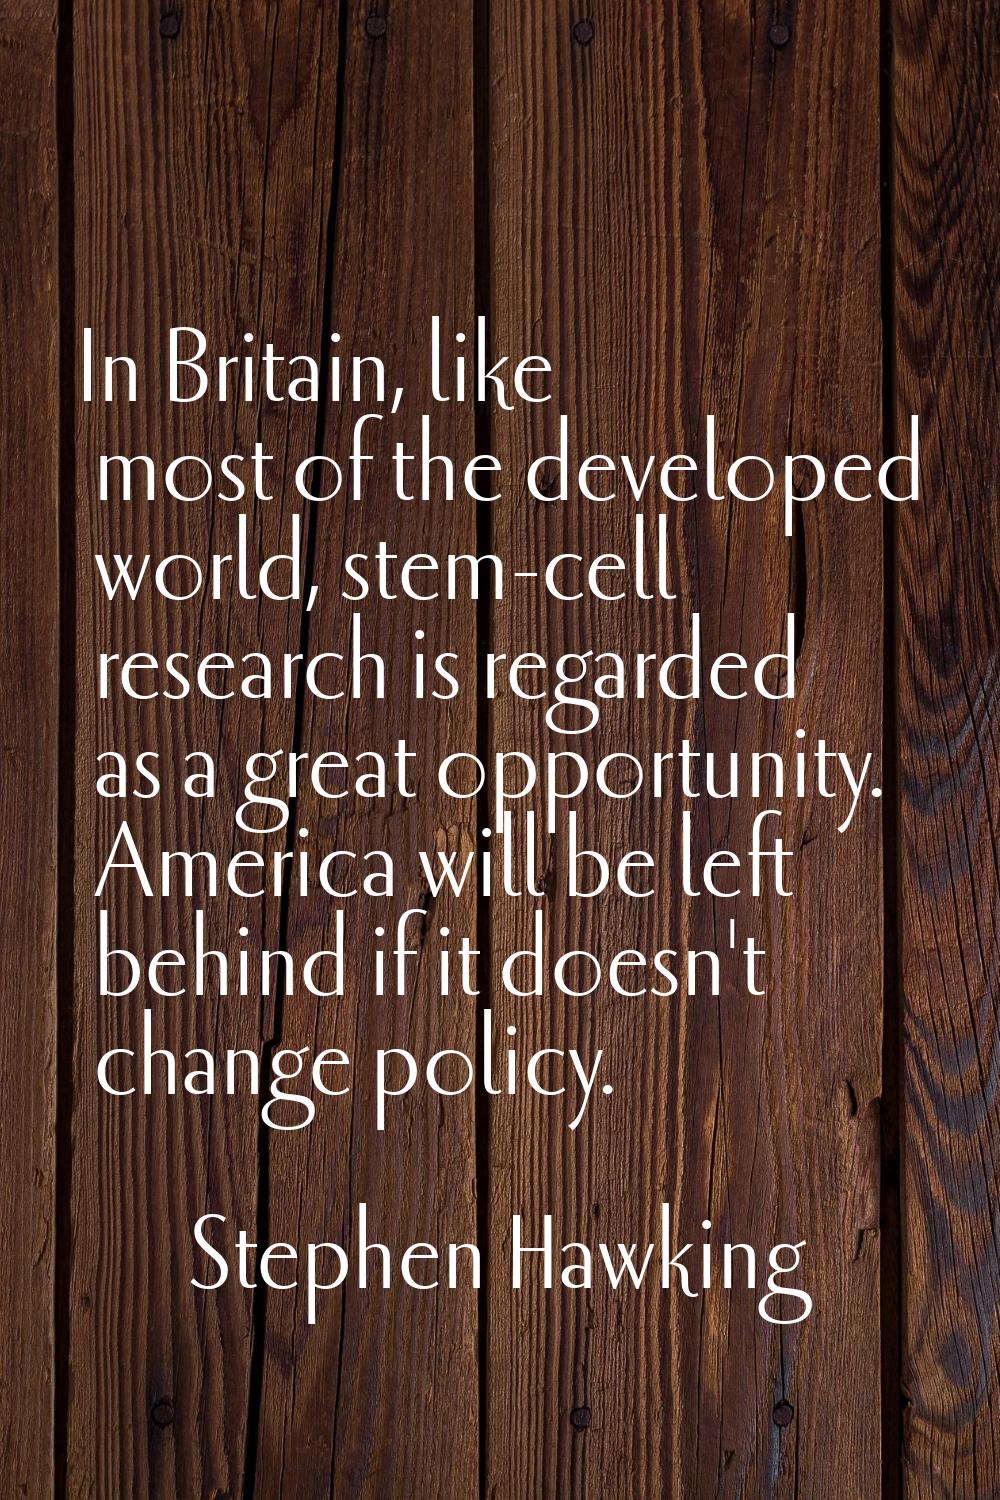 In Britain, like most of the developed world, stem-cell research is regarded as a great opportunity